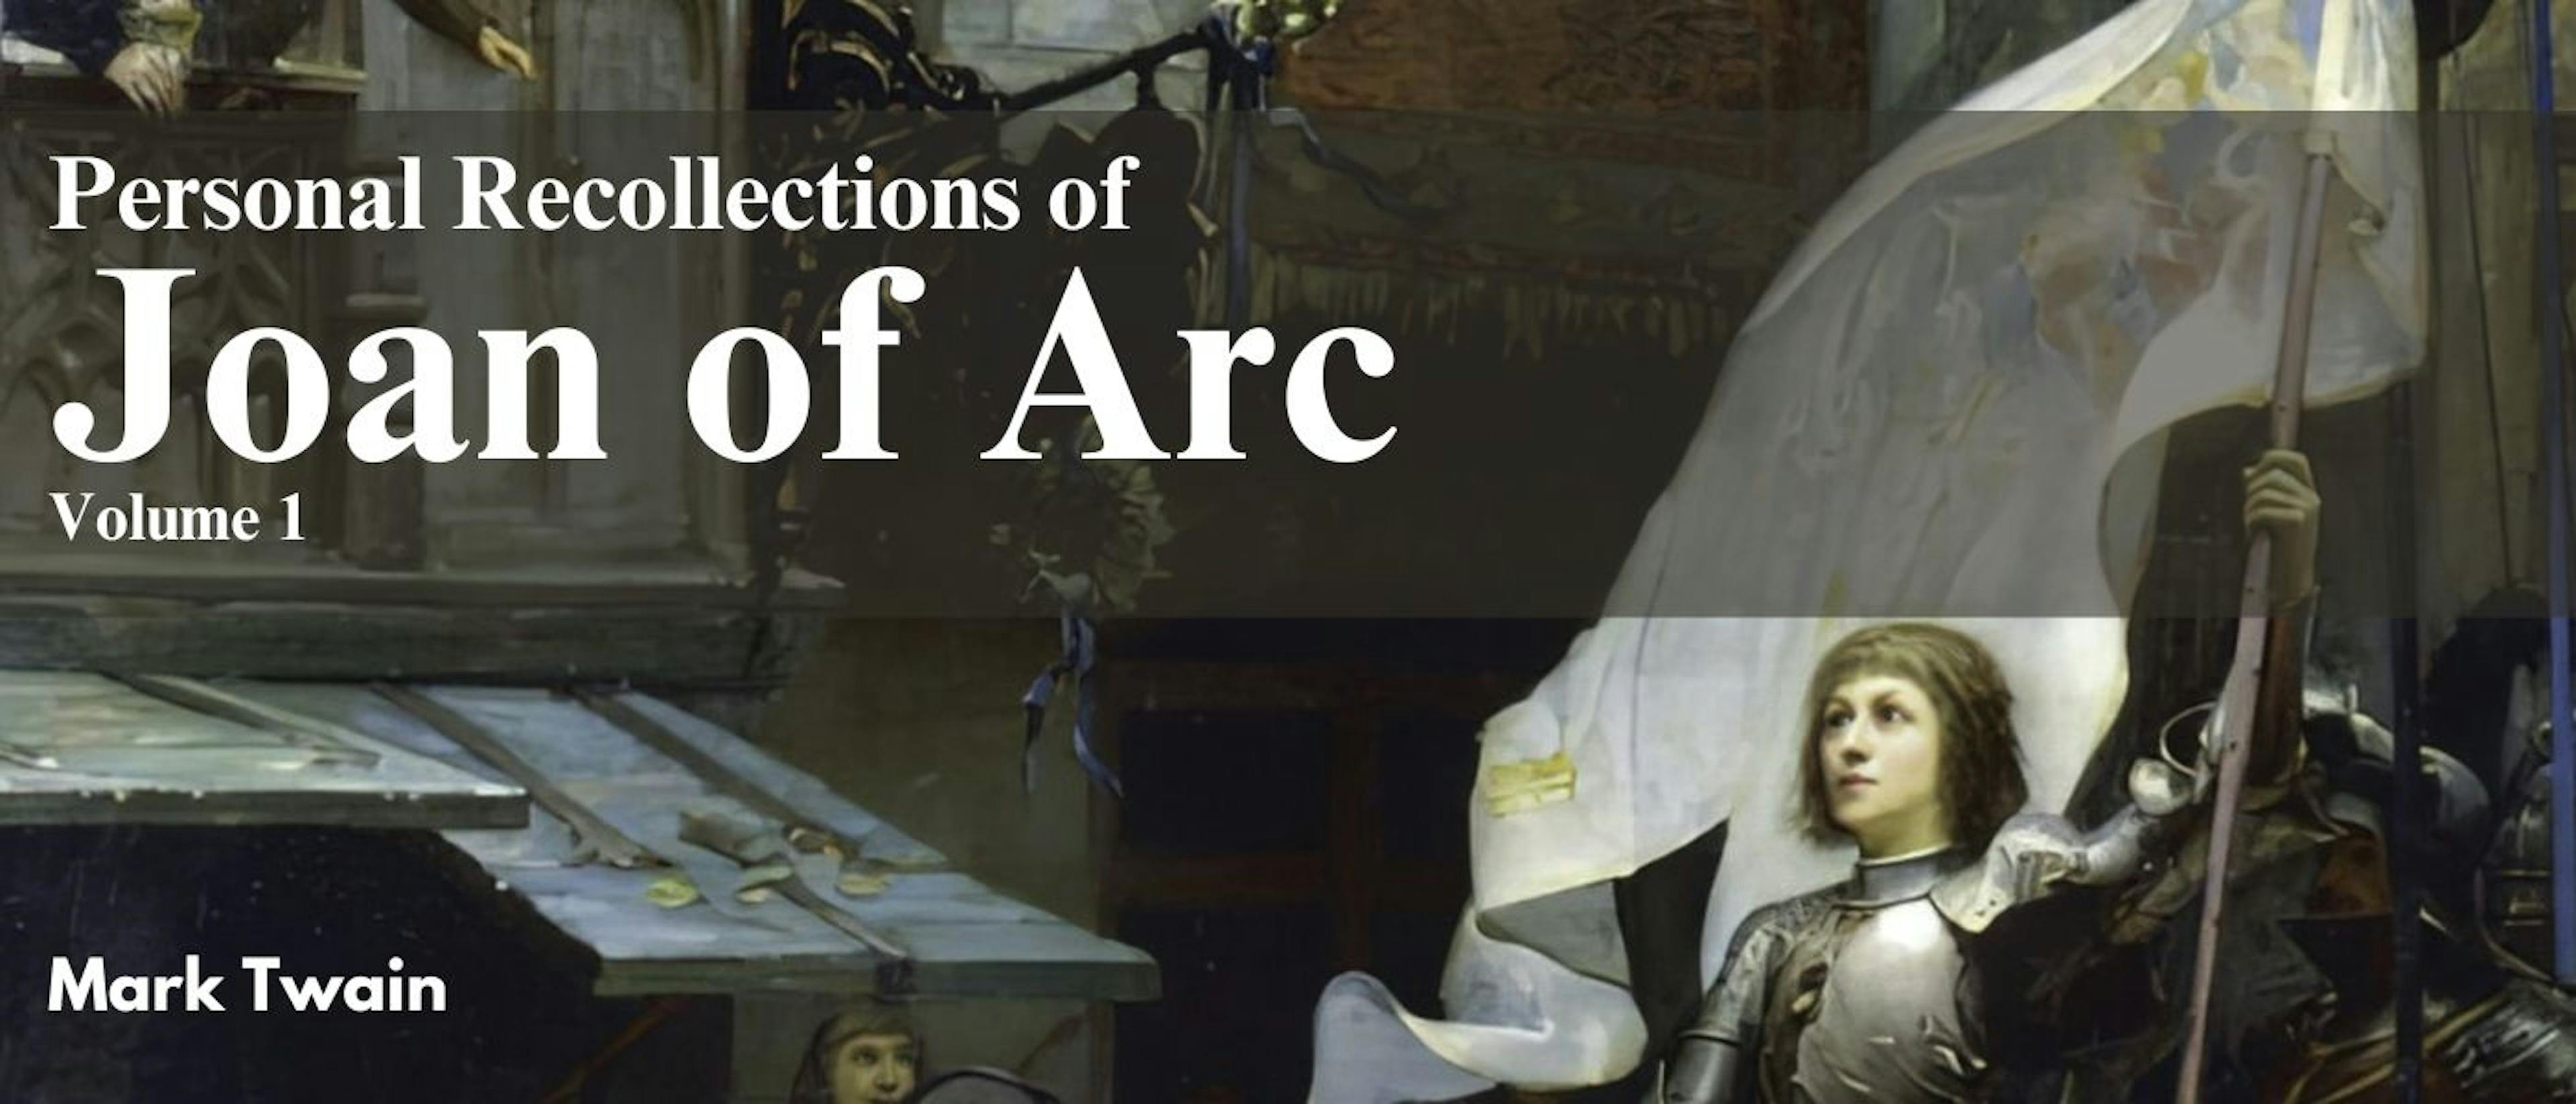 featured image - Personal Recollections of Joan of Arc — Volume 1 by Mark Twain - Table of Links